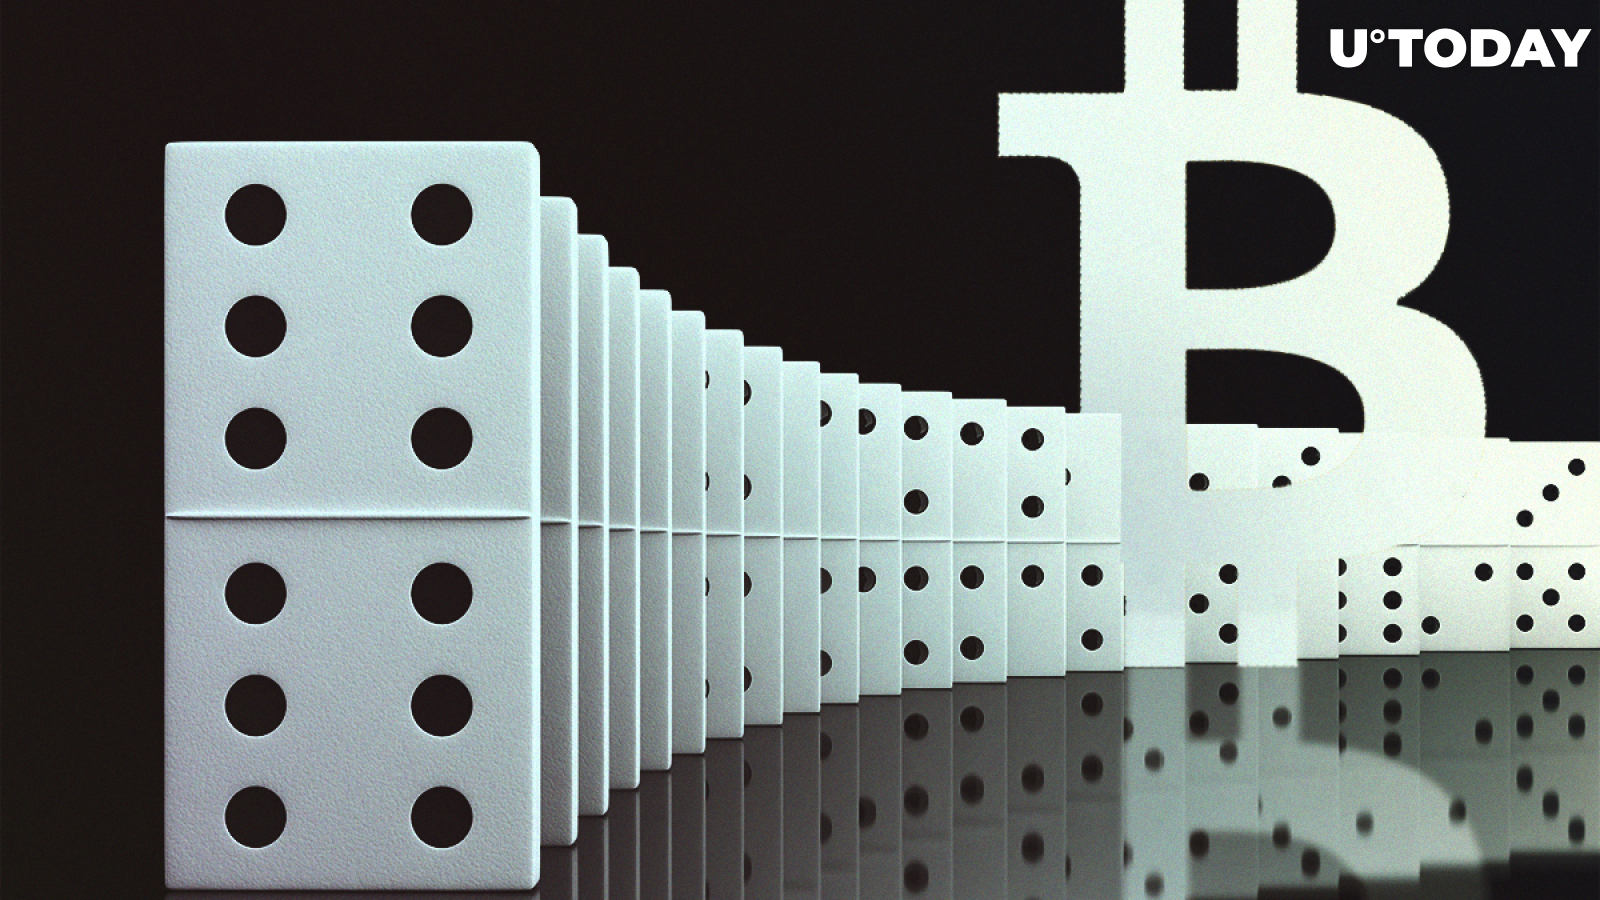 BTC Price Will Be $8,200 but Traders Predict a ‘Falling Domino’ Pattern to Knock It Down